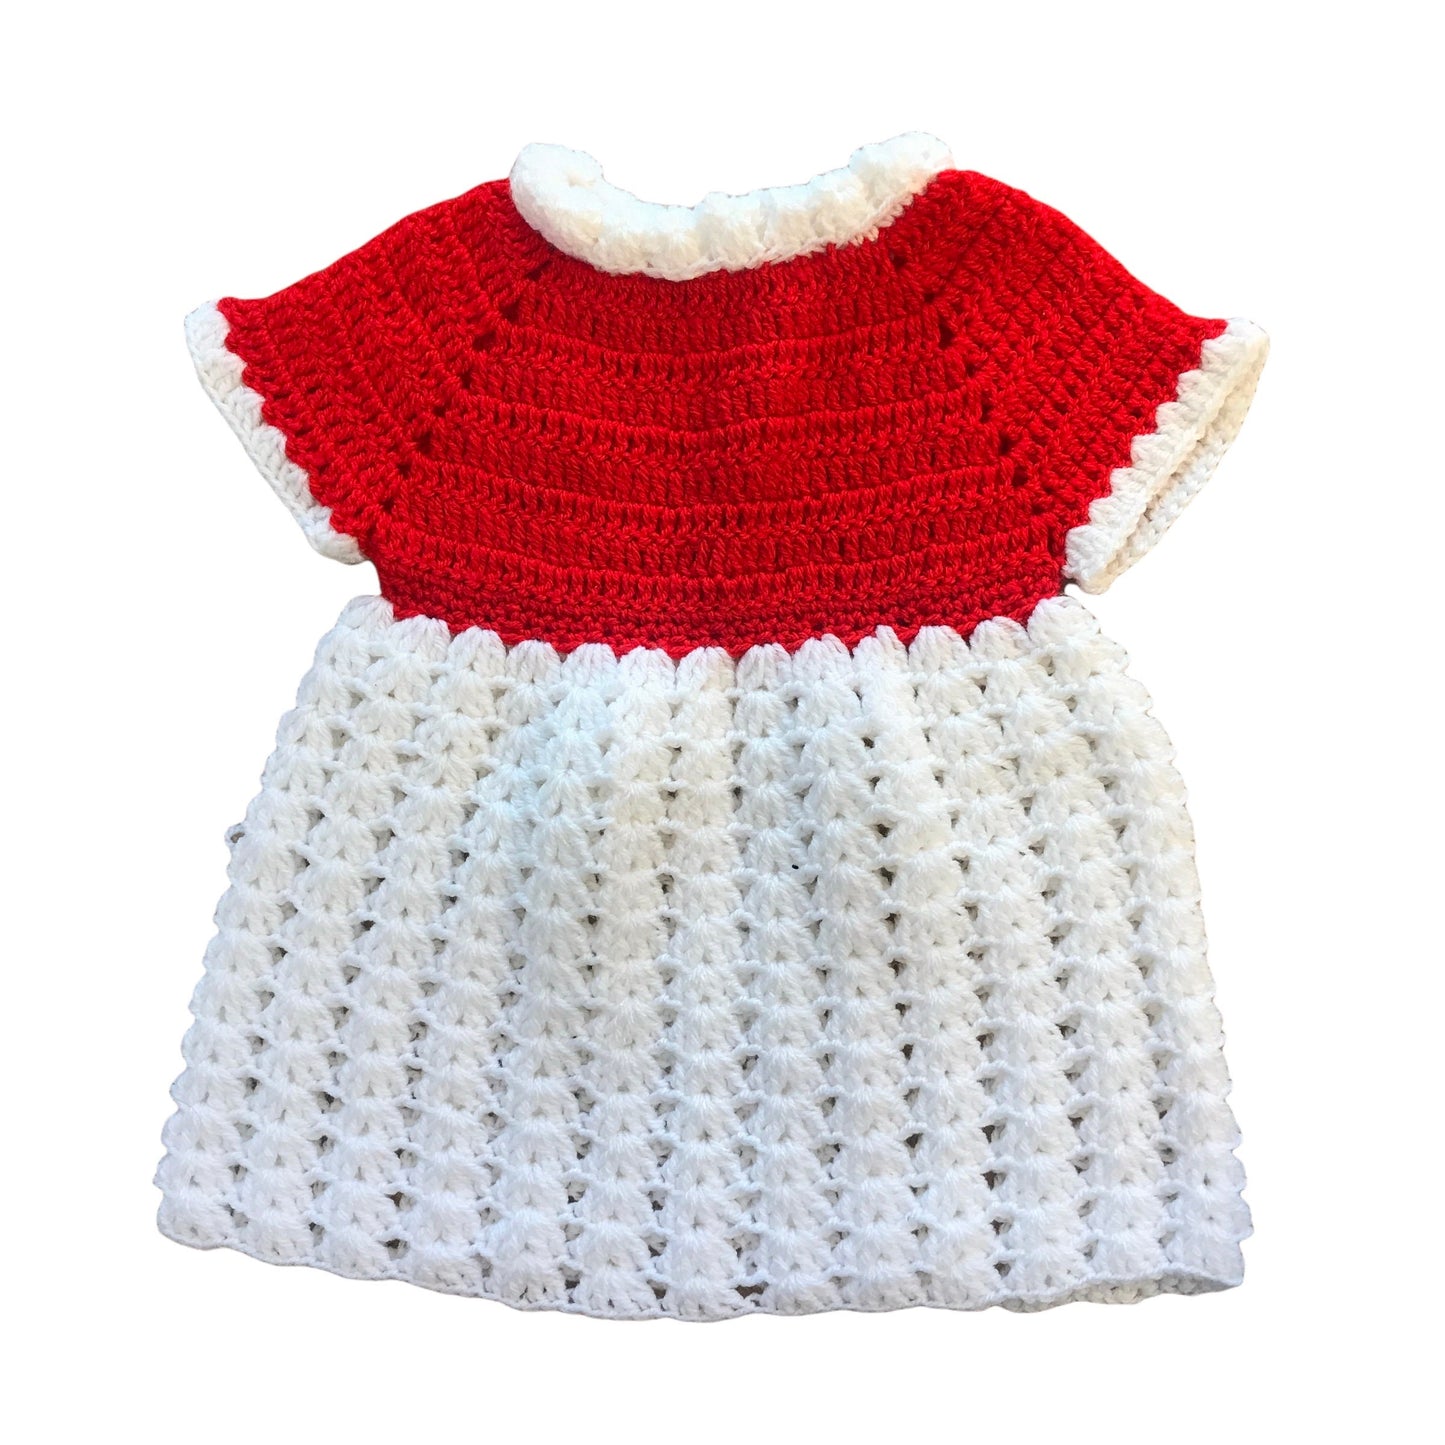 Vintage 1960's Red / White Knitted Dress   2-3Y